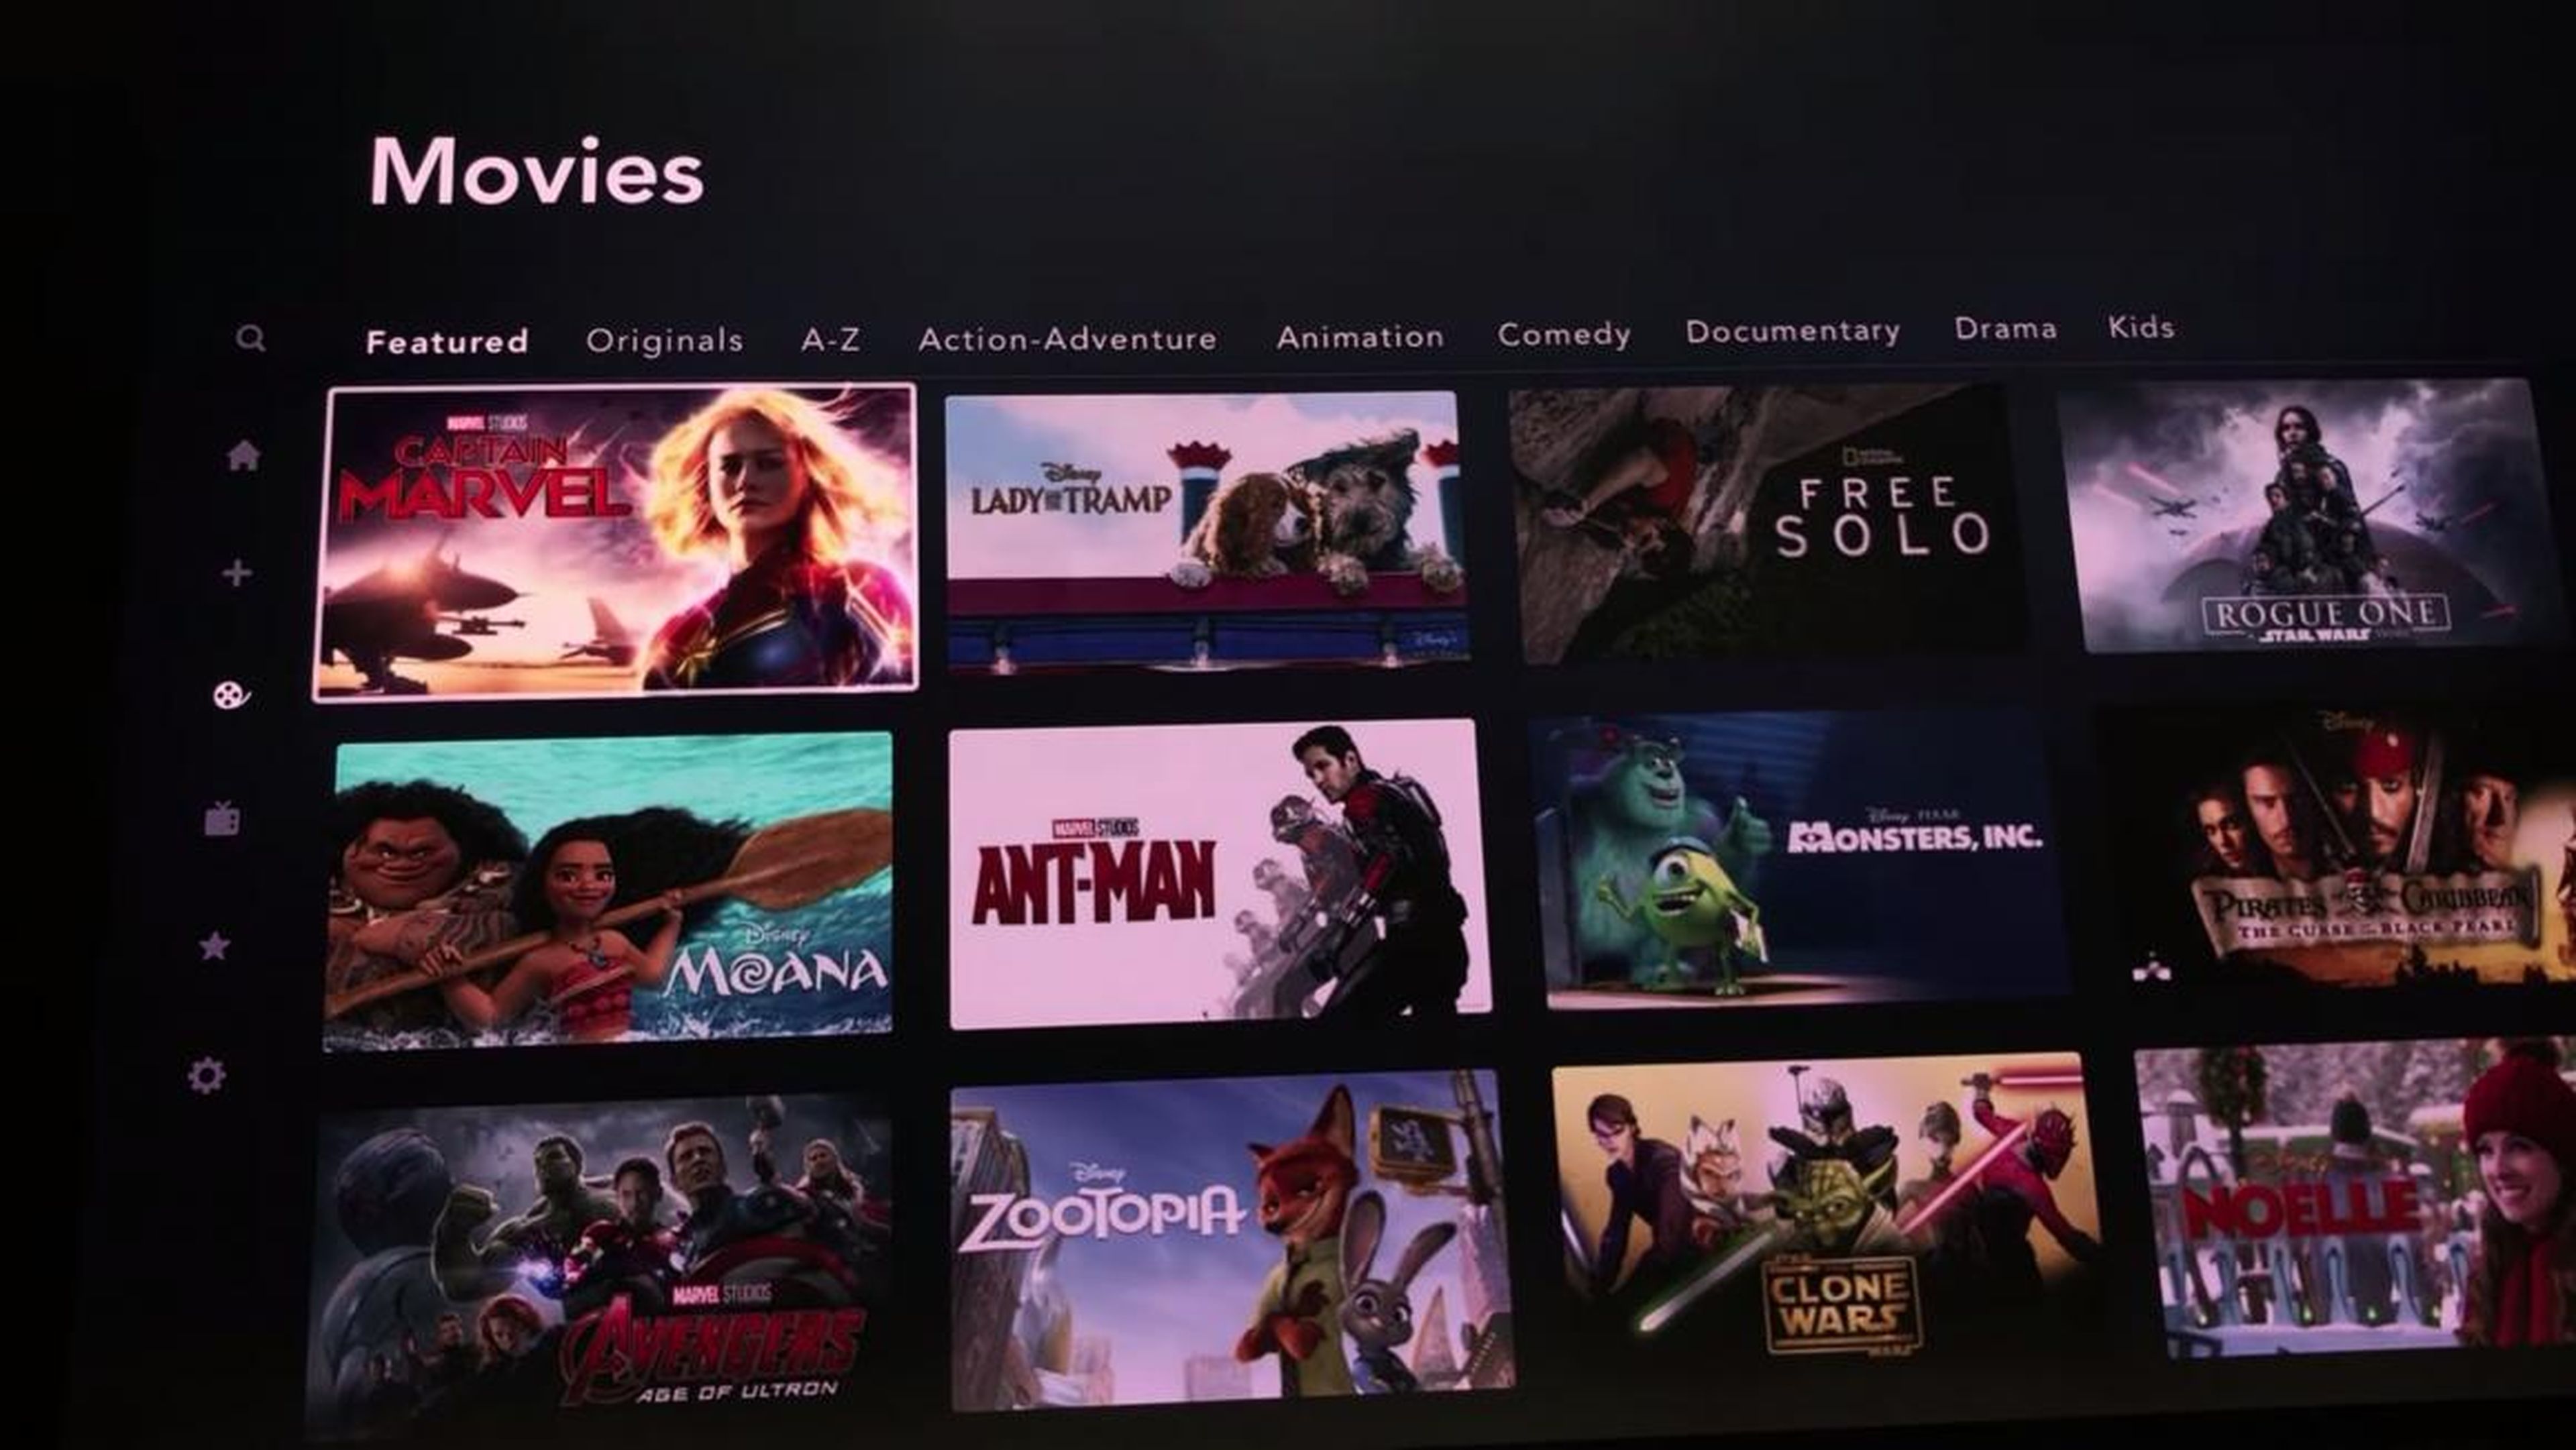 When you visit the Movies tab, you can filter by originals, alphabetical order, or genre. By default, Disney will show you featured films it wants you to see.